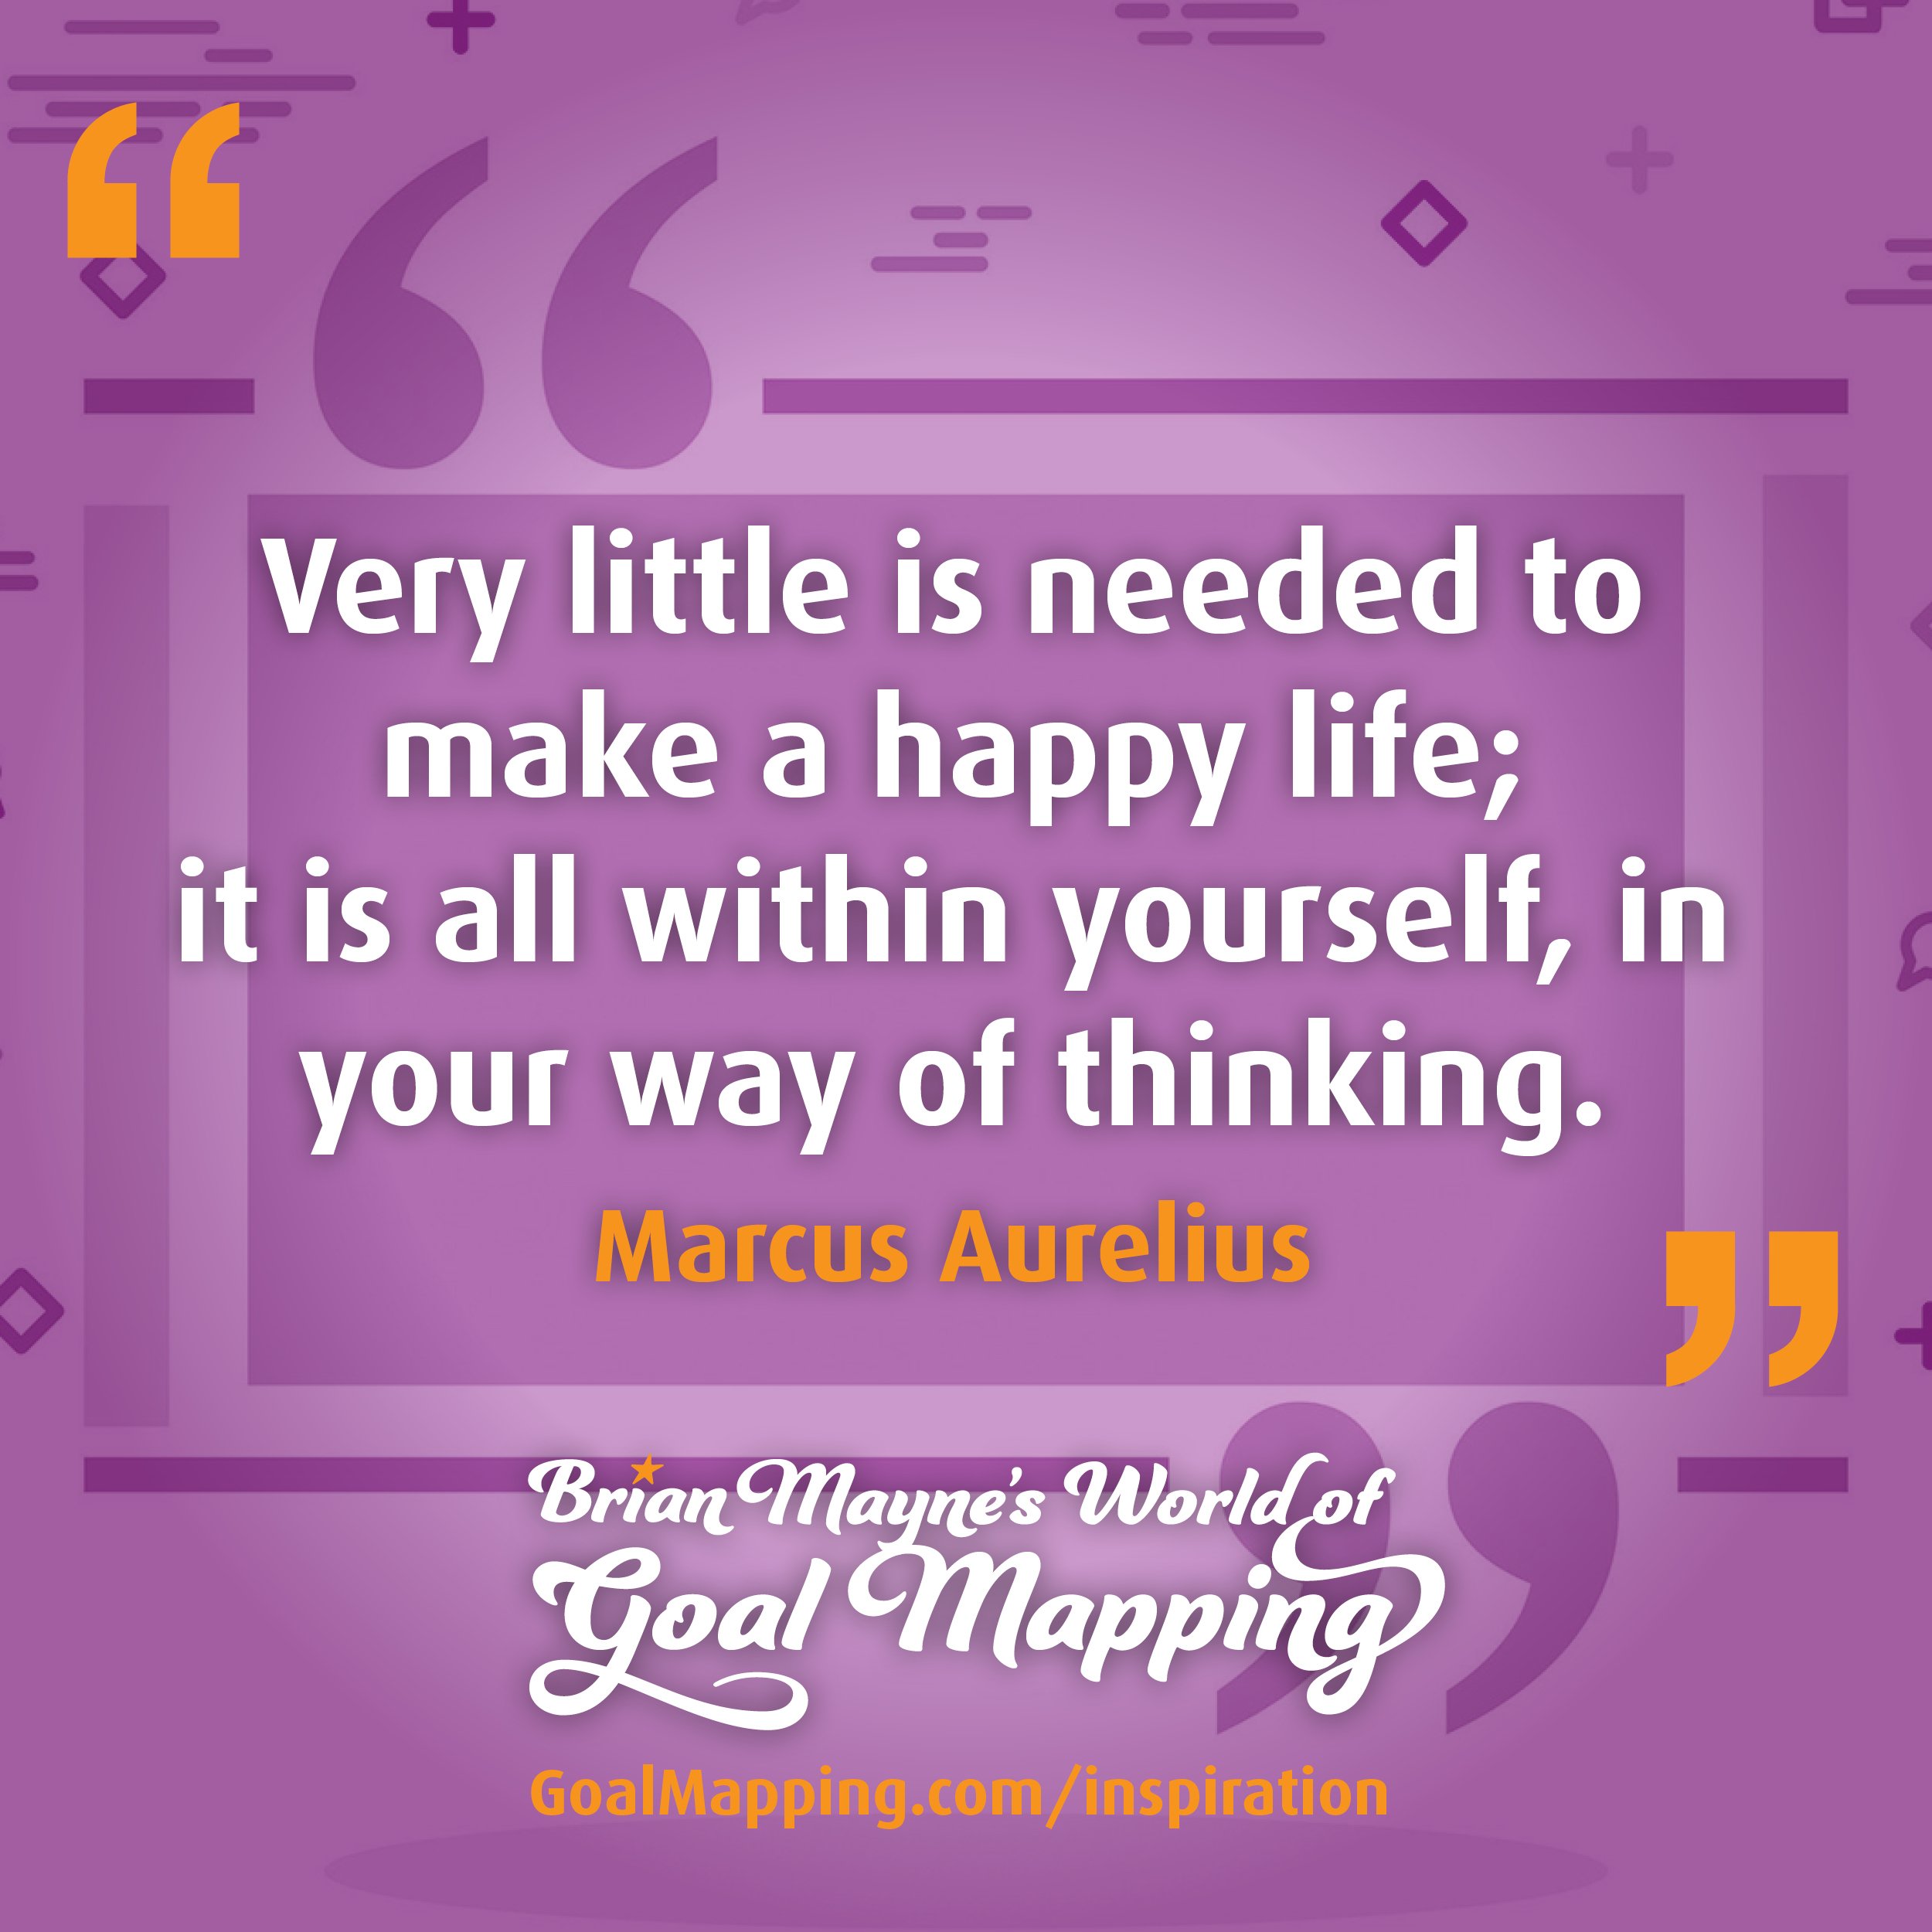 "Very little is needed to make a happy life; it is all within yourself, in your way of thinking." Marcus Aurelius